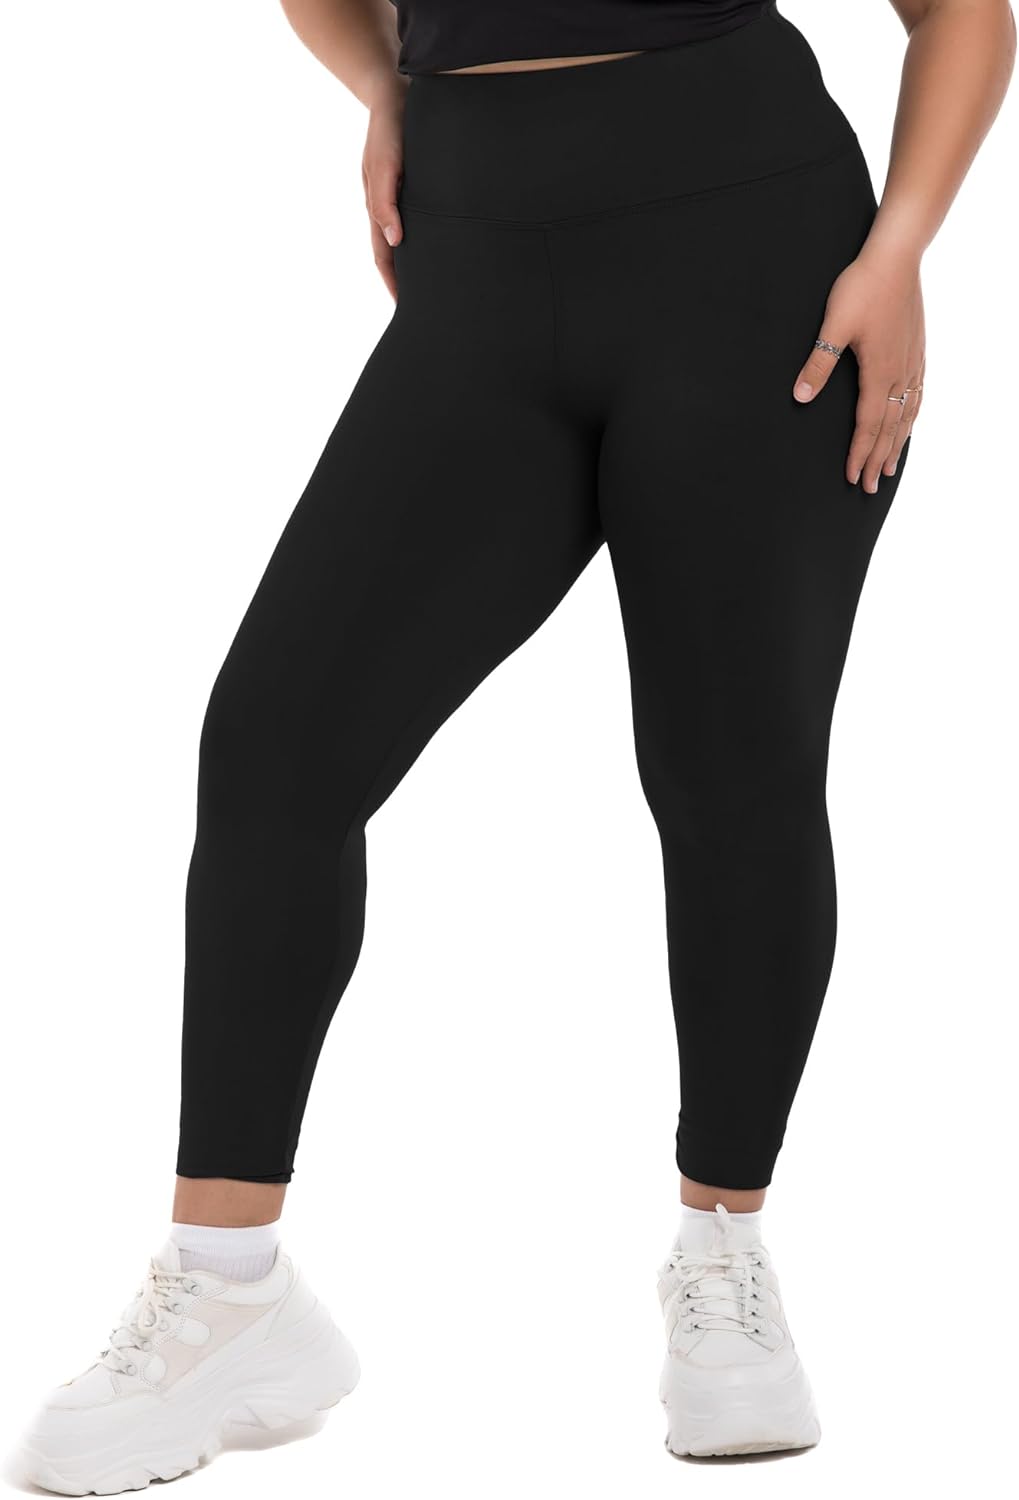 SINOPHANT Plus Size Leggings for Women, High Waisted Tummy Control Buttery Super Soft Black Yoga Pants for Workout